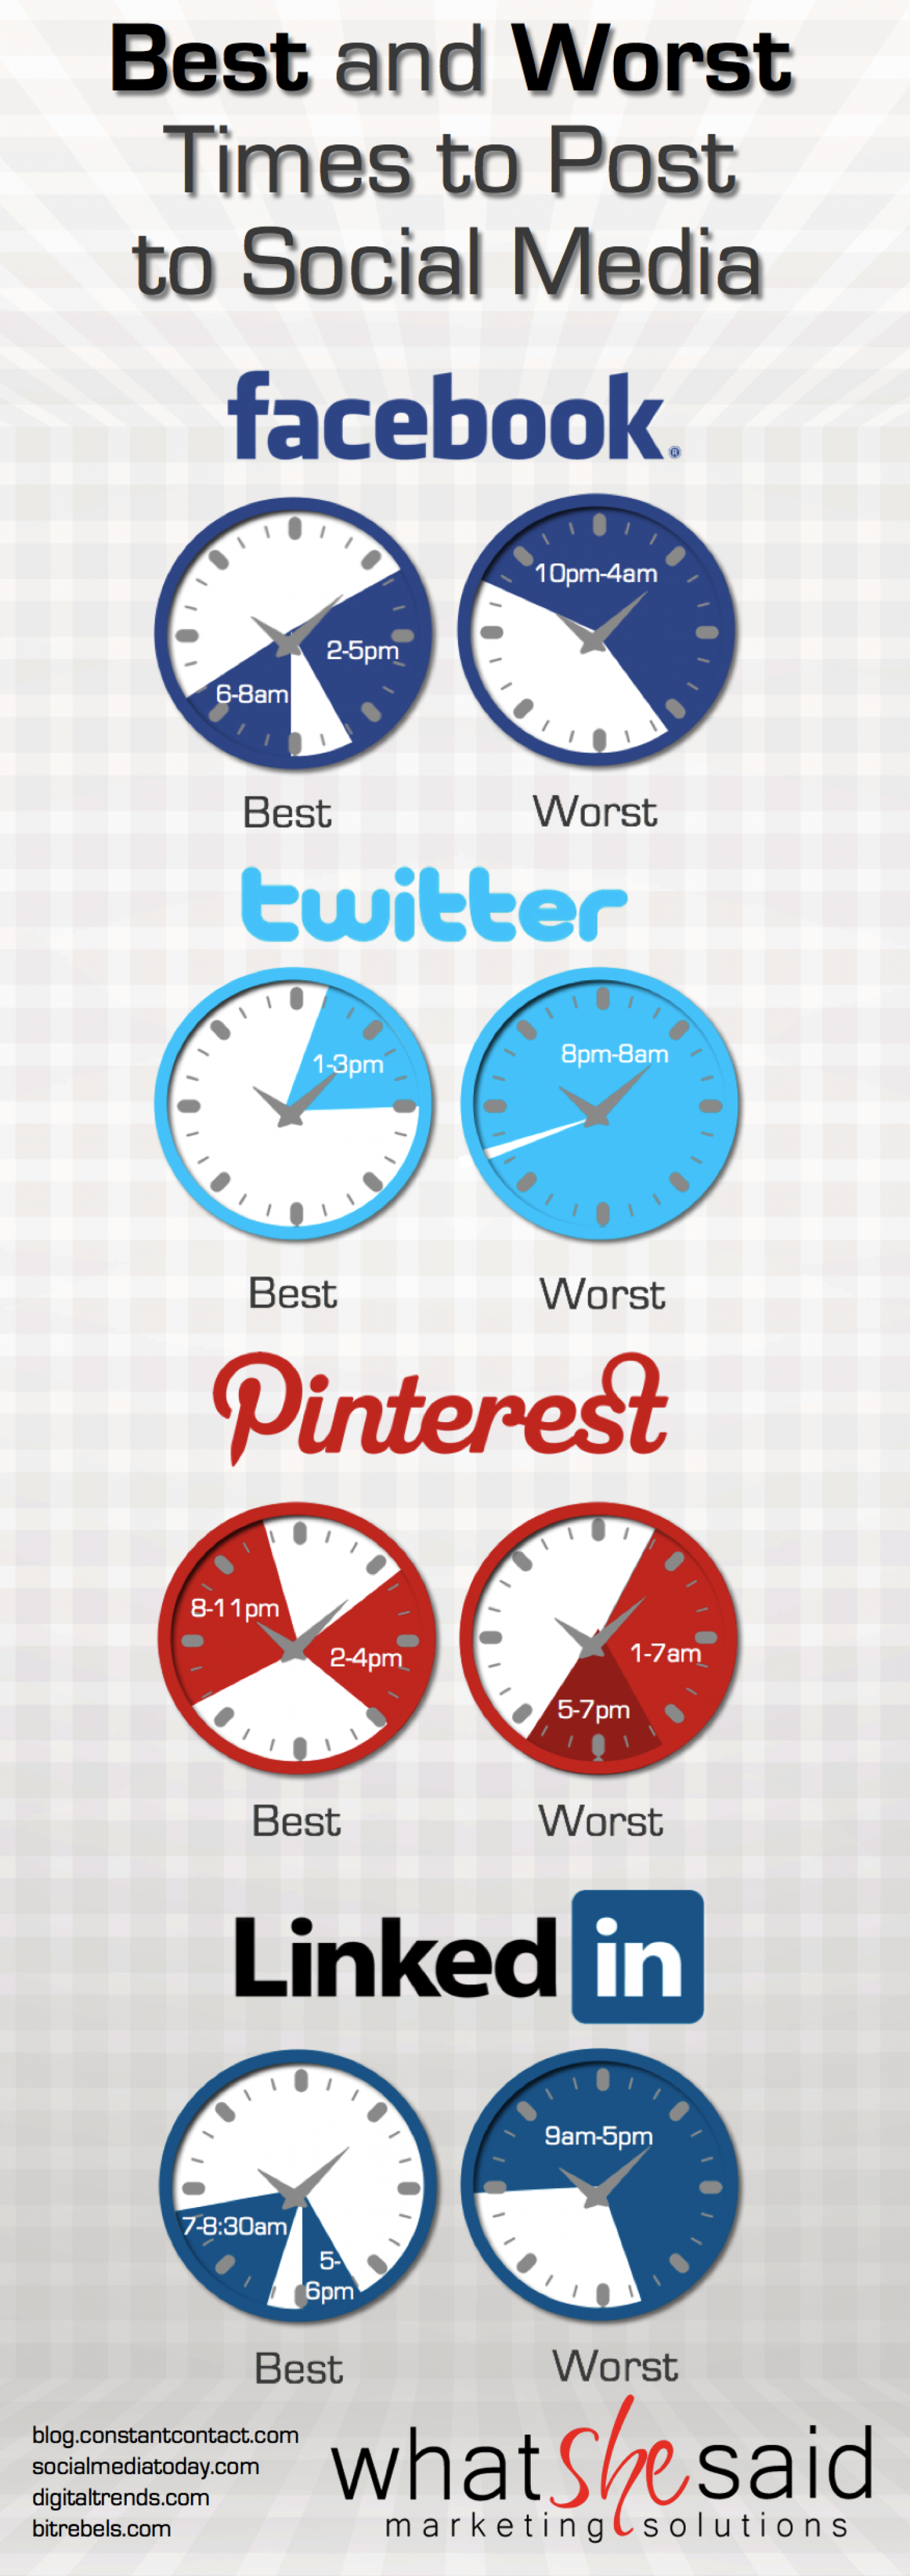 Best and Worst Times to Post to Social Media Infographic